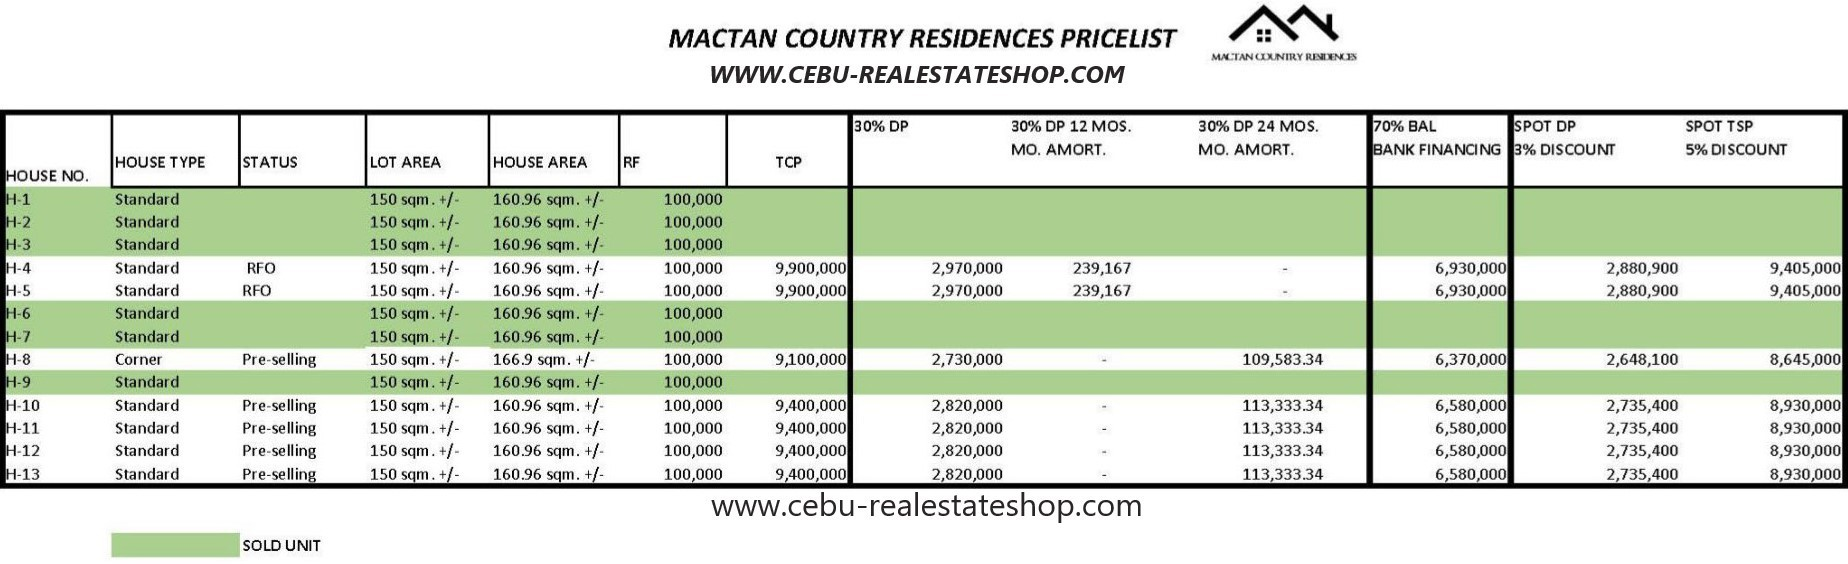 mactan country homes price list